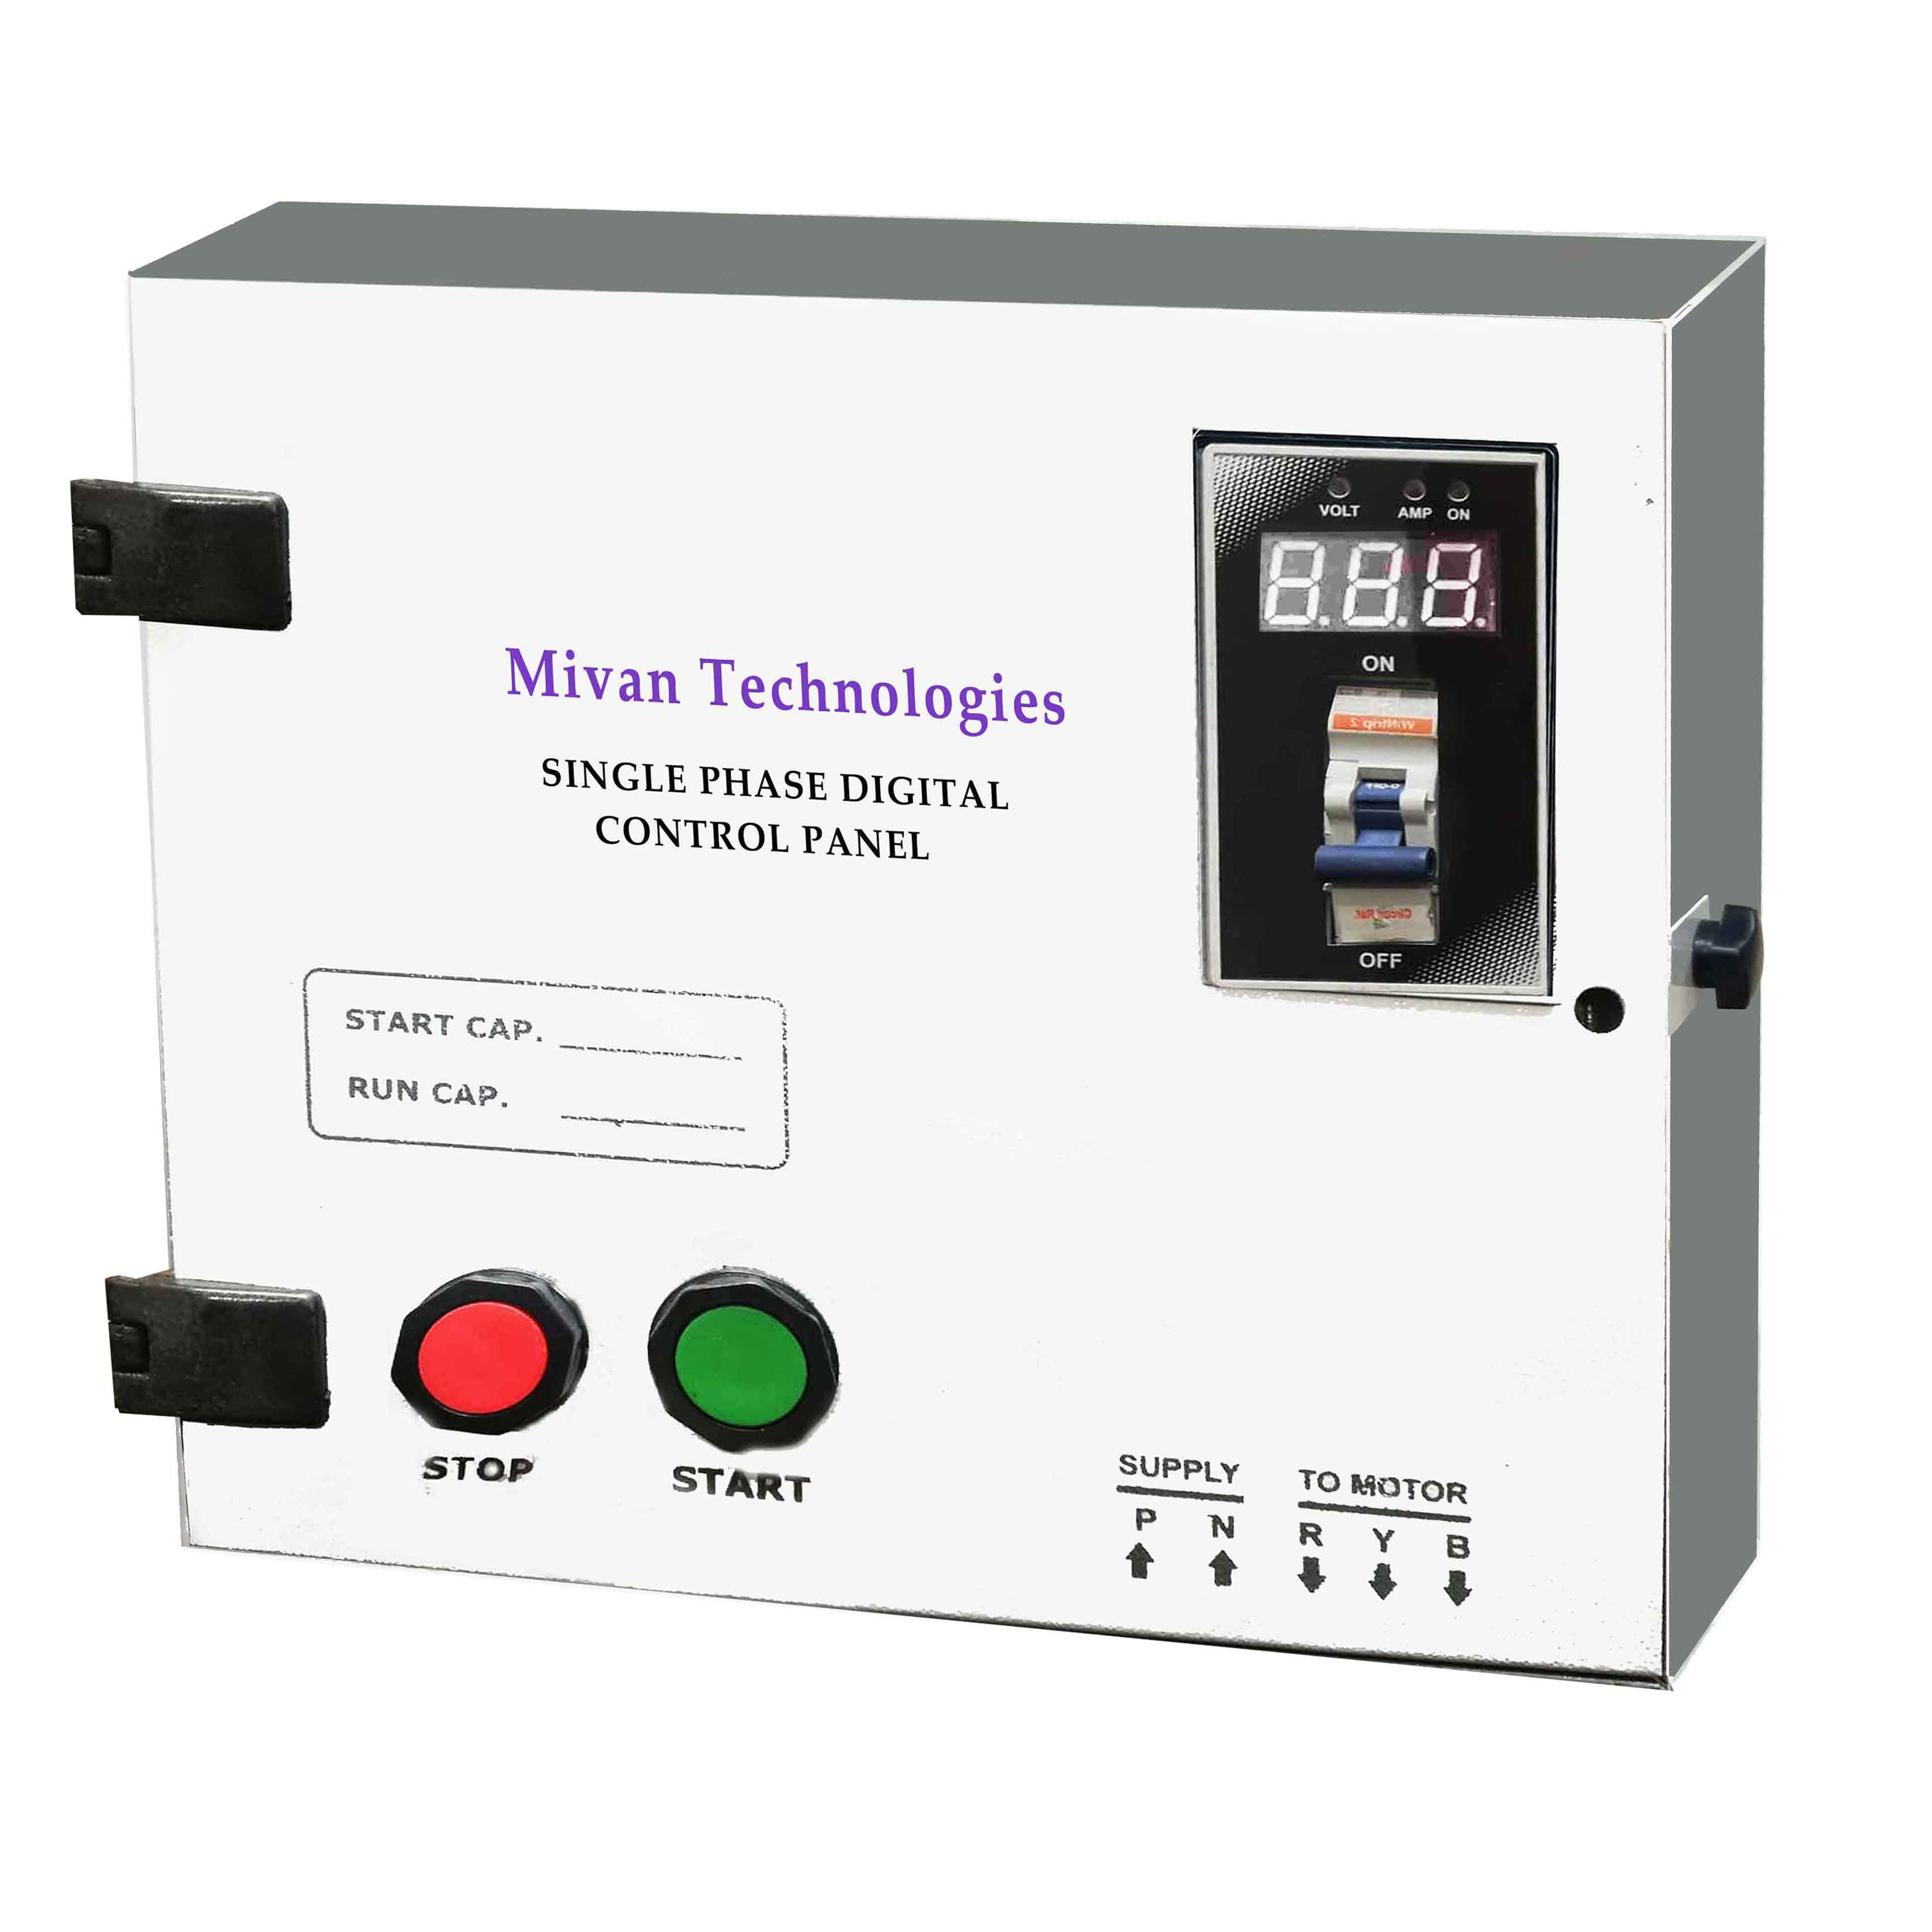 DMPS SR 2 HP Single phase motor Digital starter panel with BCH contactor with digital volt and amp meter with start and run capacitor